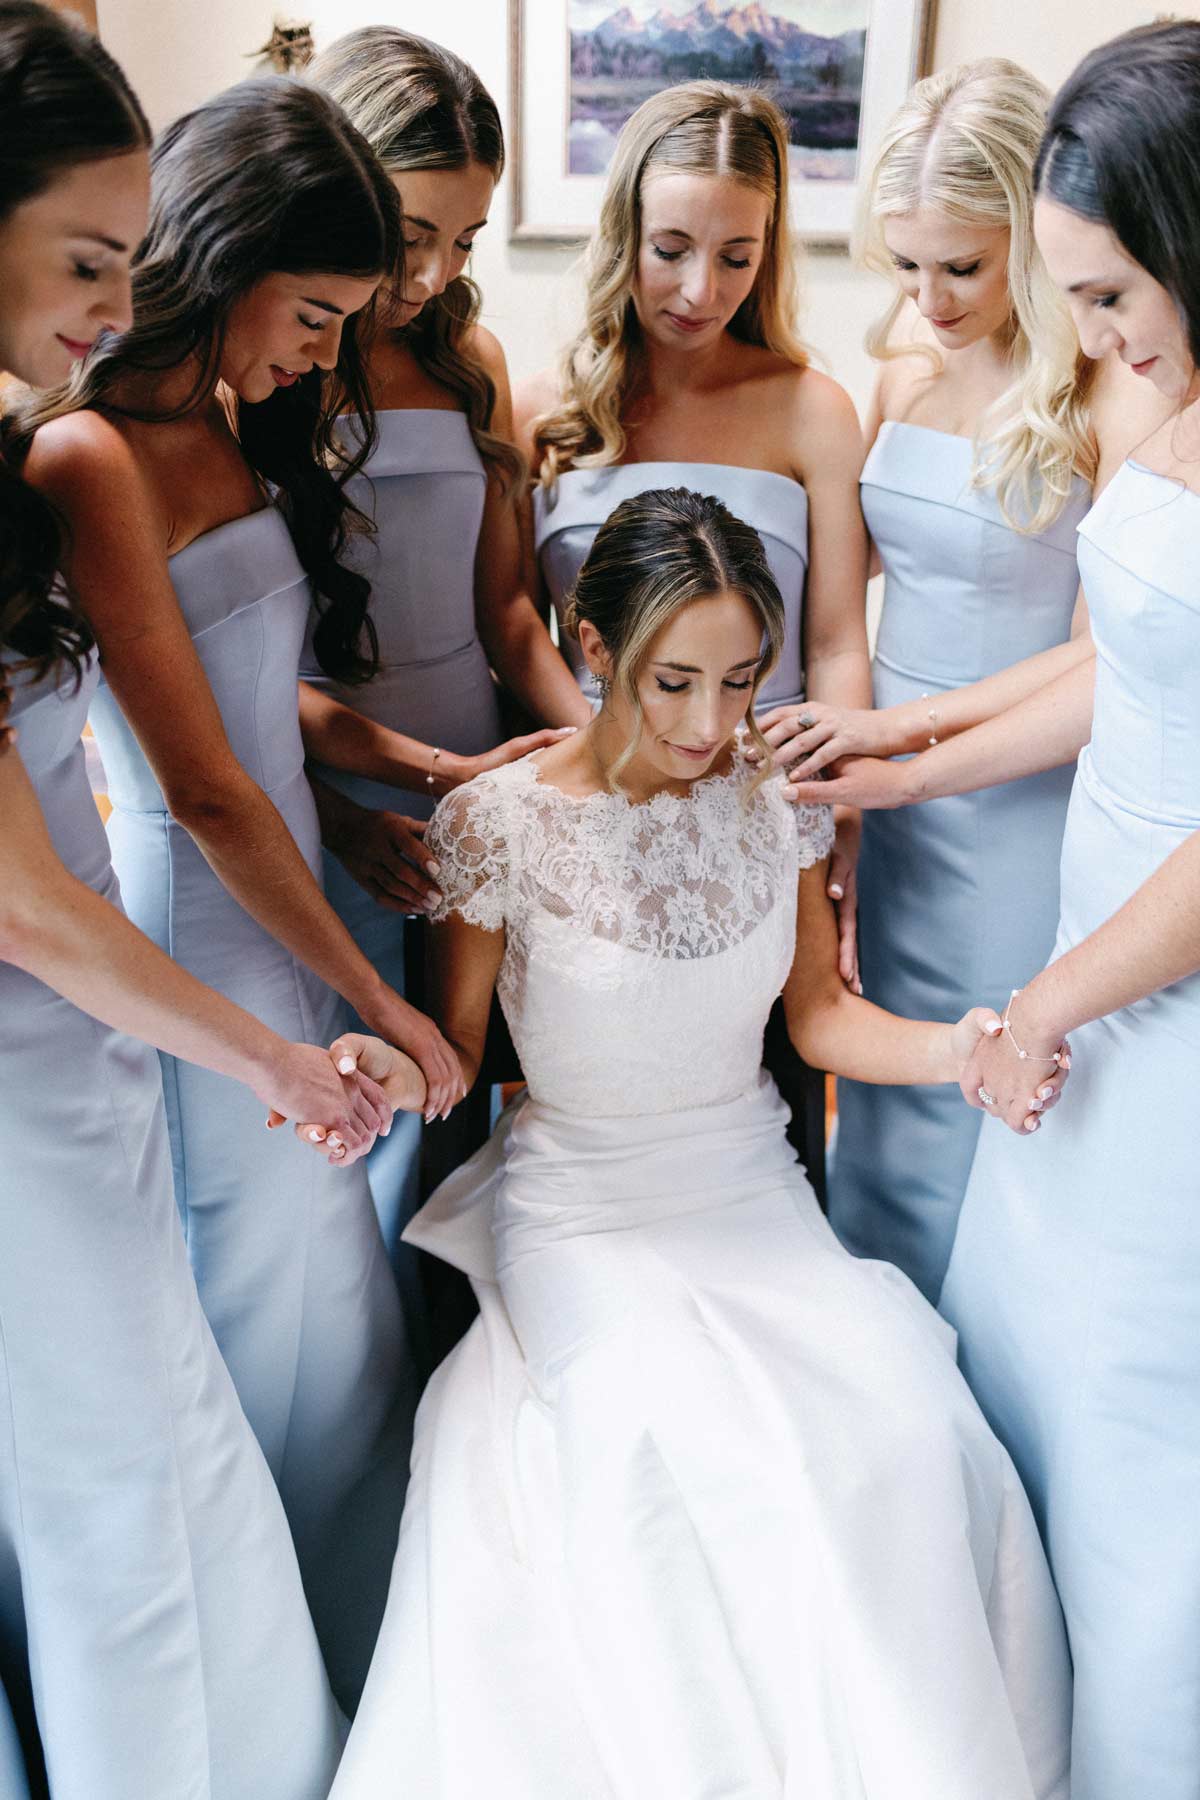 bride sitting in the middle of her bridesmaids who are praying over her